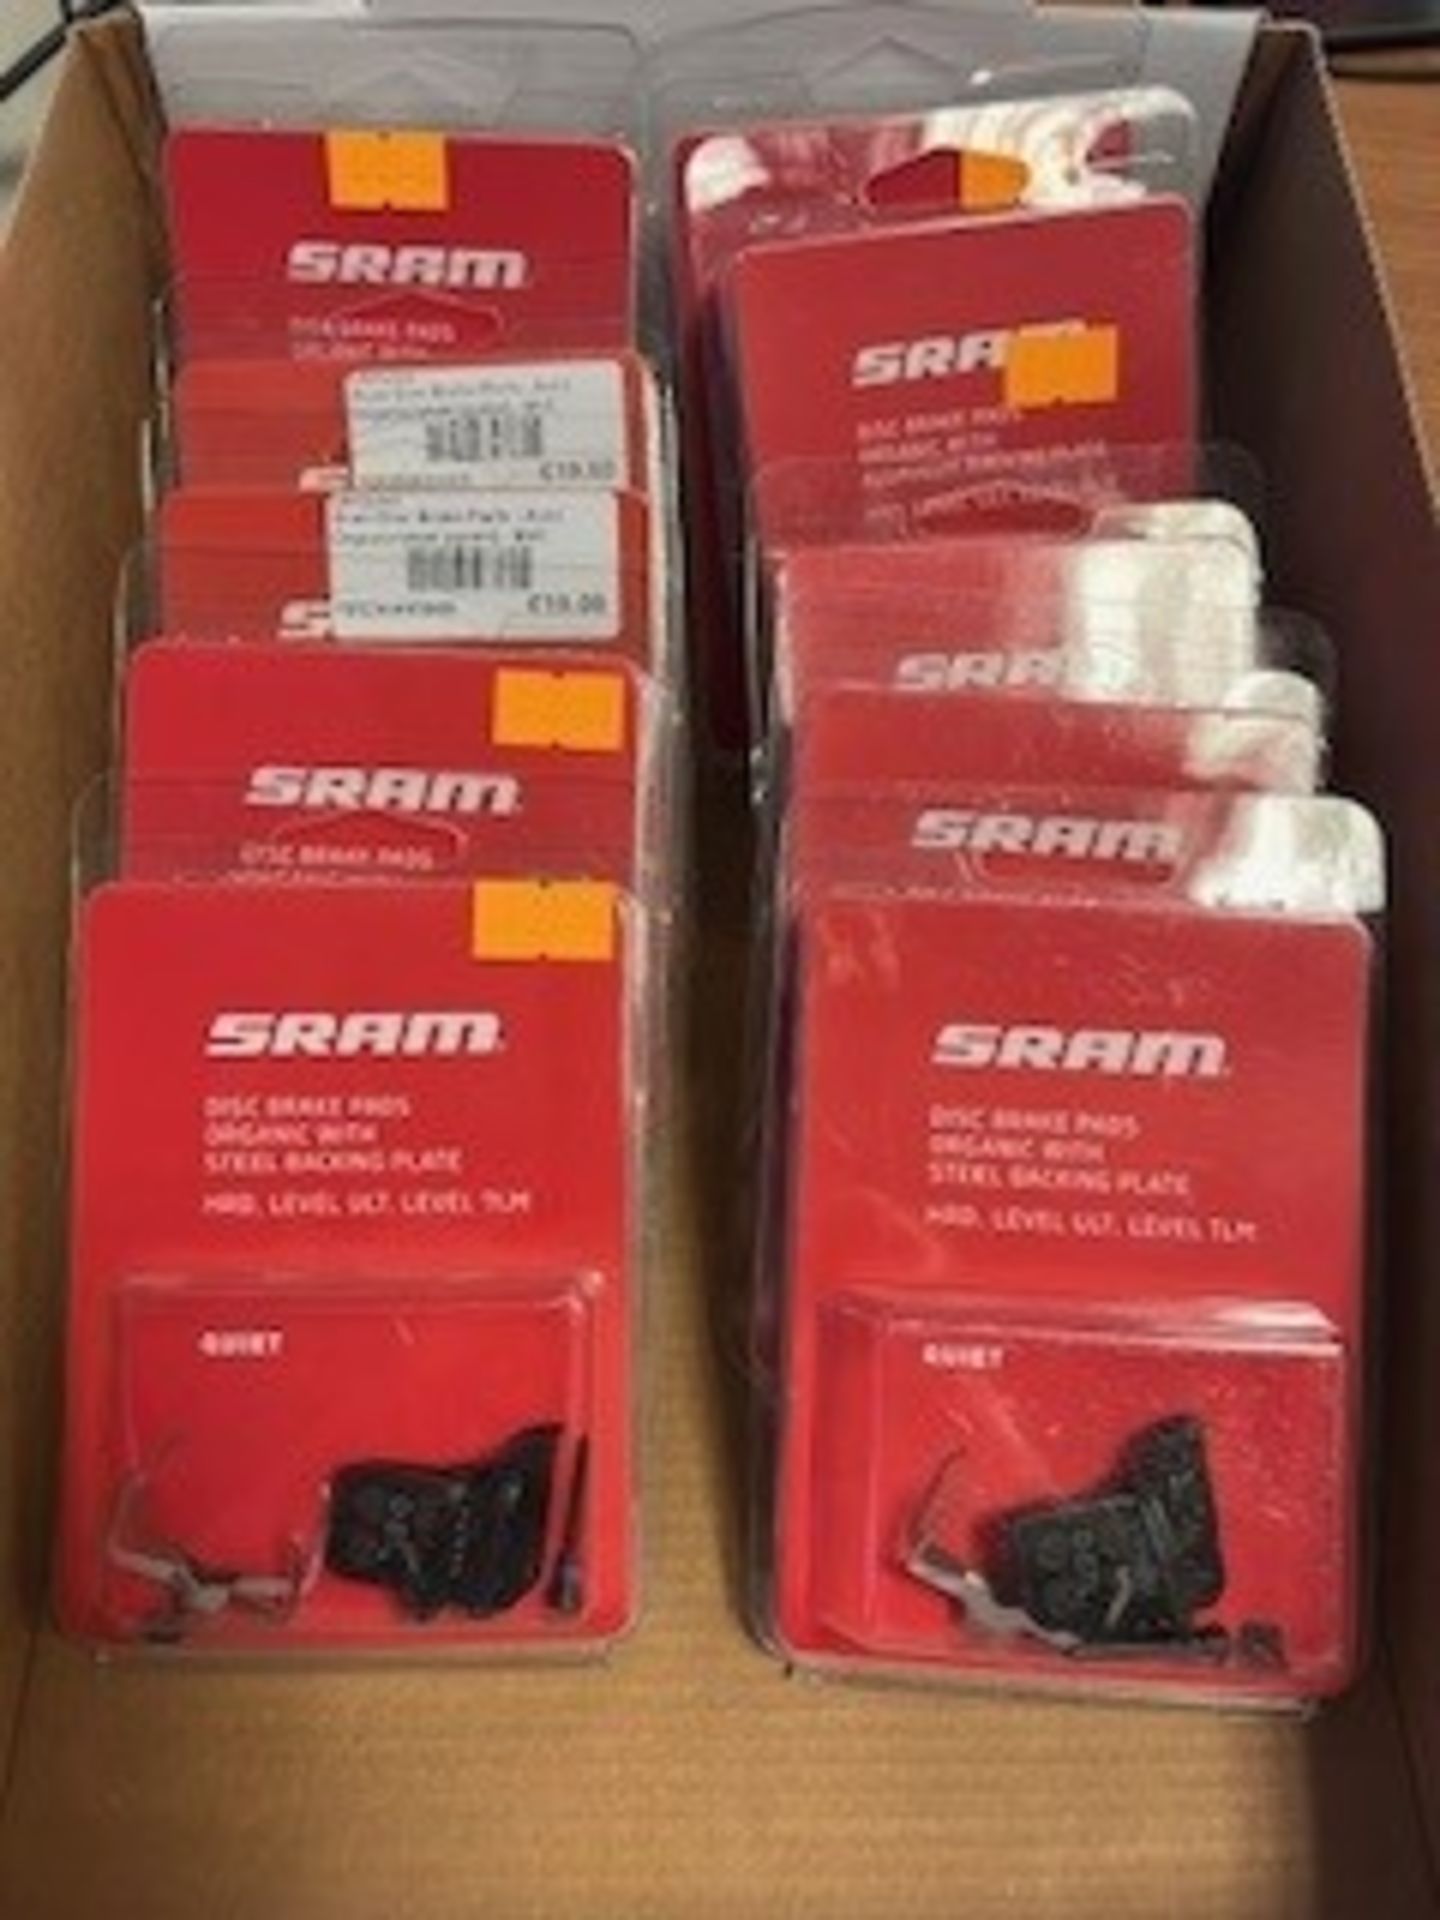 Sram Brake Pads to include 5x Disc Brake Pads Organic with Steel Backing Plate (HRD, LEVEL ULT, LEVE - Image 9 of 9